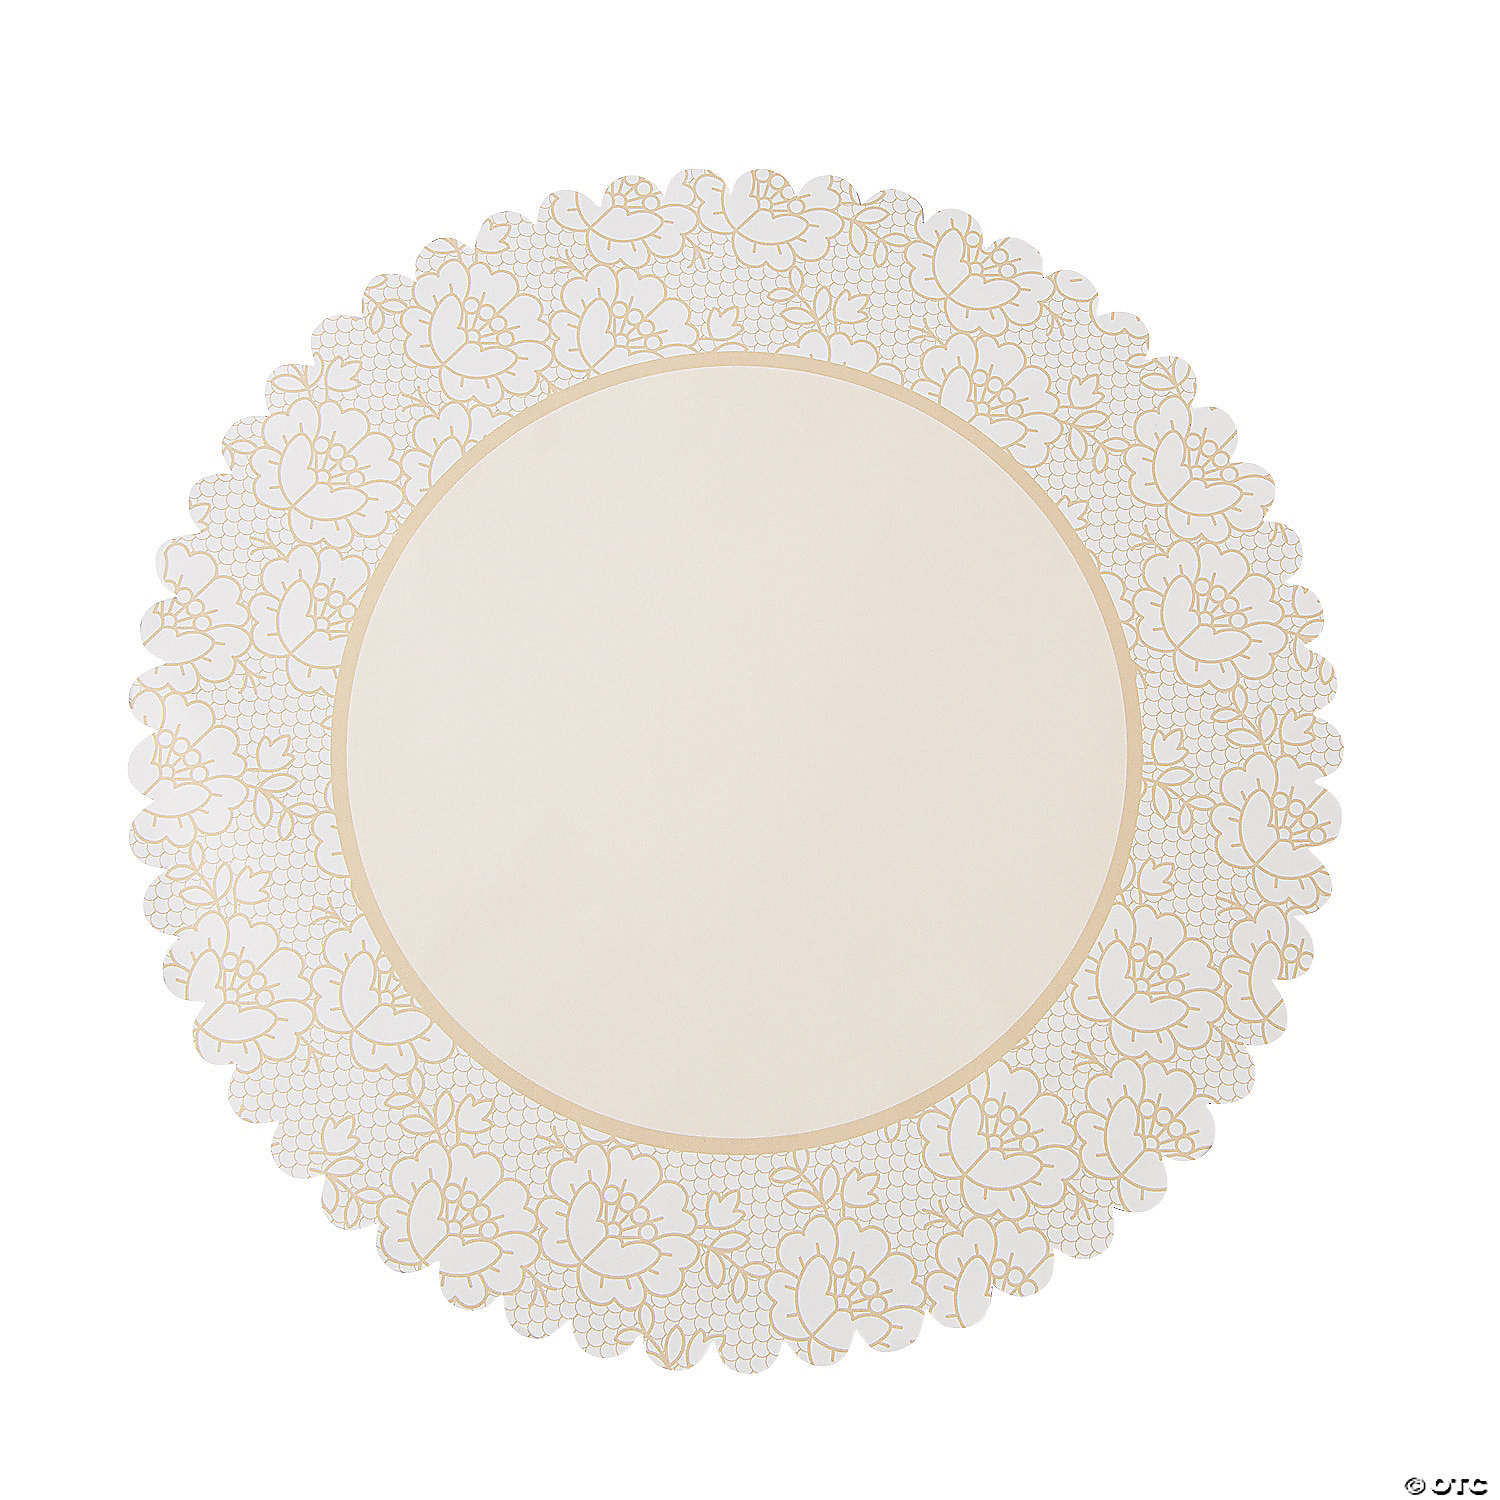 Shabby Chic Lace Placemats Oriental, Round Lace Table Mats